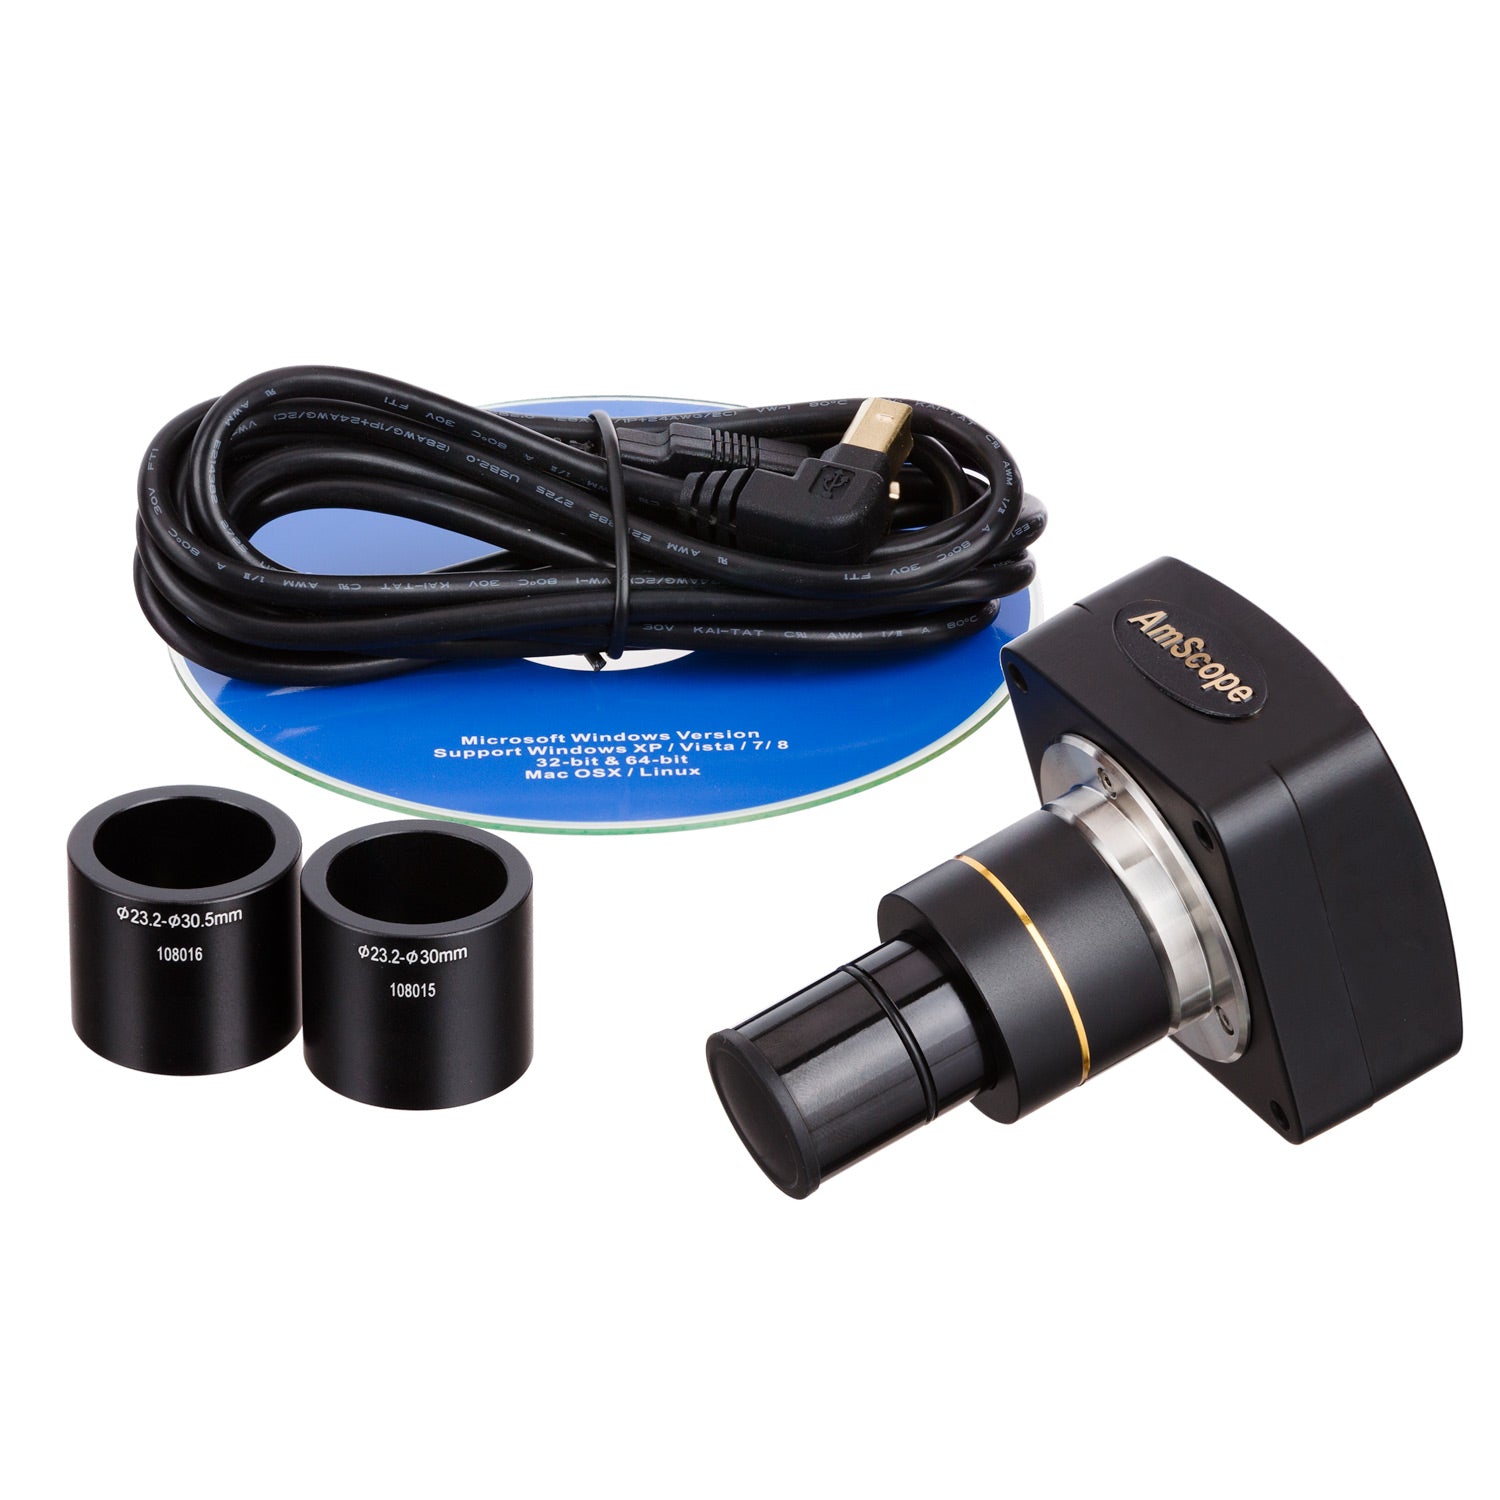 8MP USB 2.0 Color CMOS C-Mount Microscope Camera with Reduction Lens